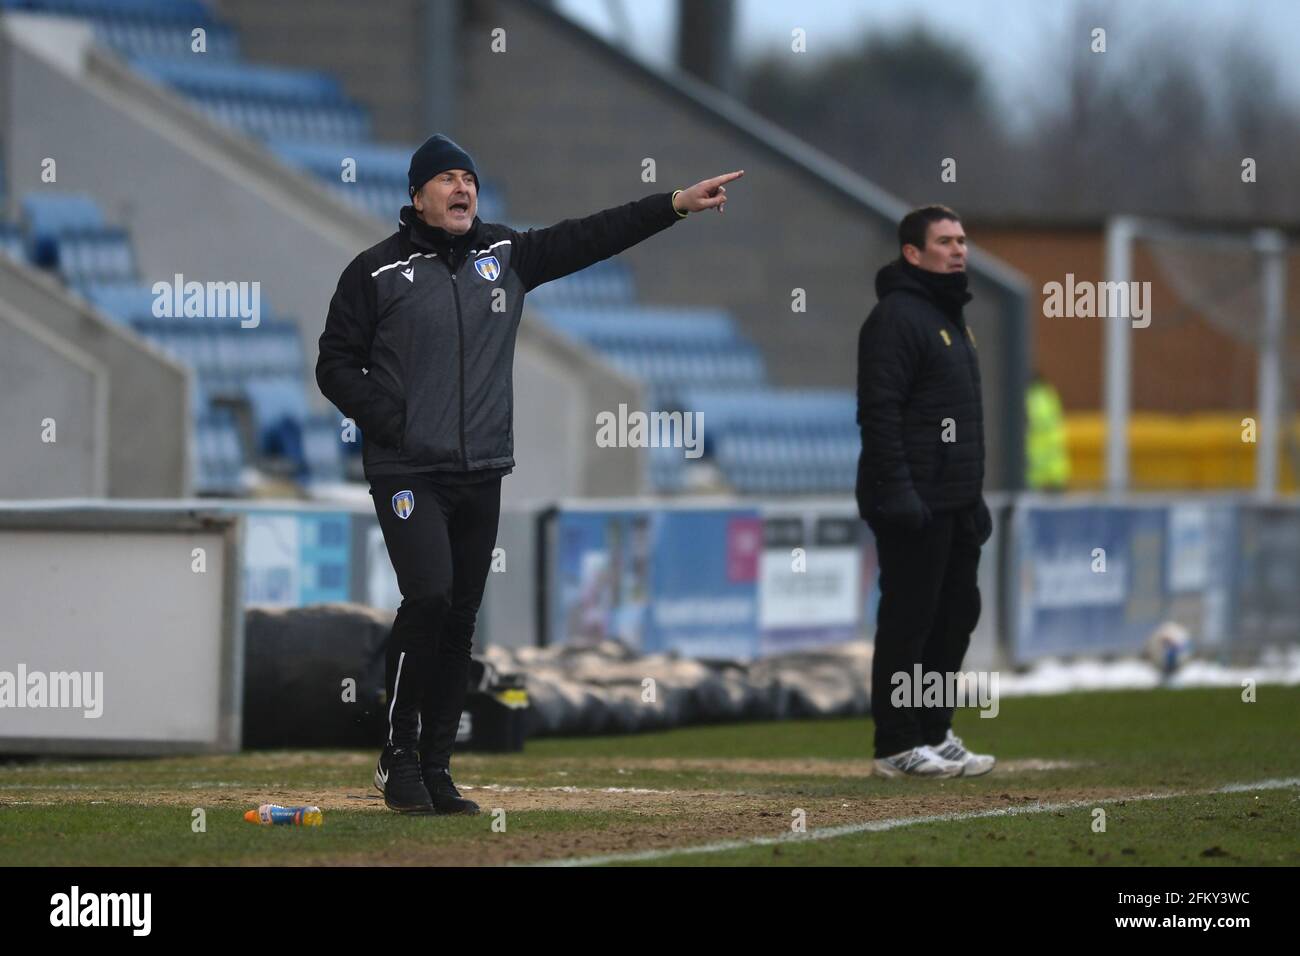 Colchester United Manager, Steve Ball and Mansfield Town Manager, Nigel Clough - Colchester United v Mansfield Town, Sky Bet League Two, JobServe Community Stadium, Colchester, UK - 14th February 2021  Editorial Use Only - DataCo restrictions apply Stock Photo